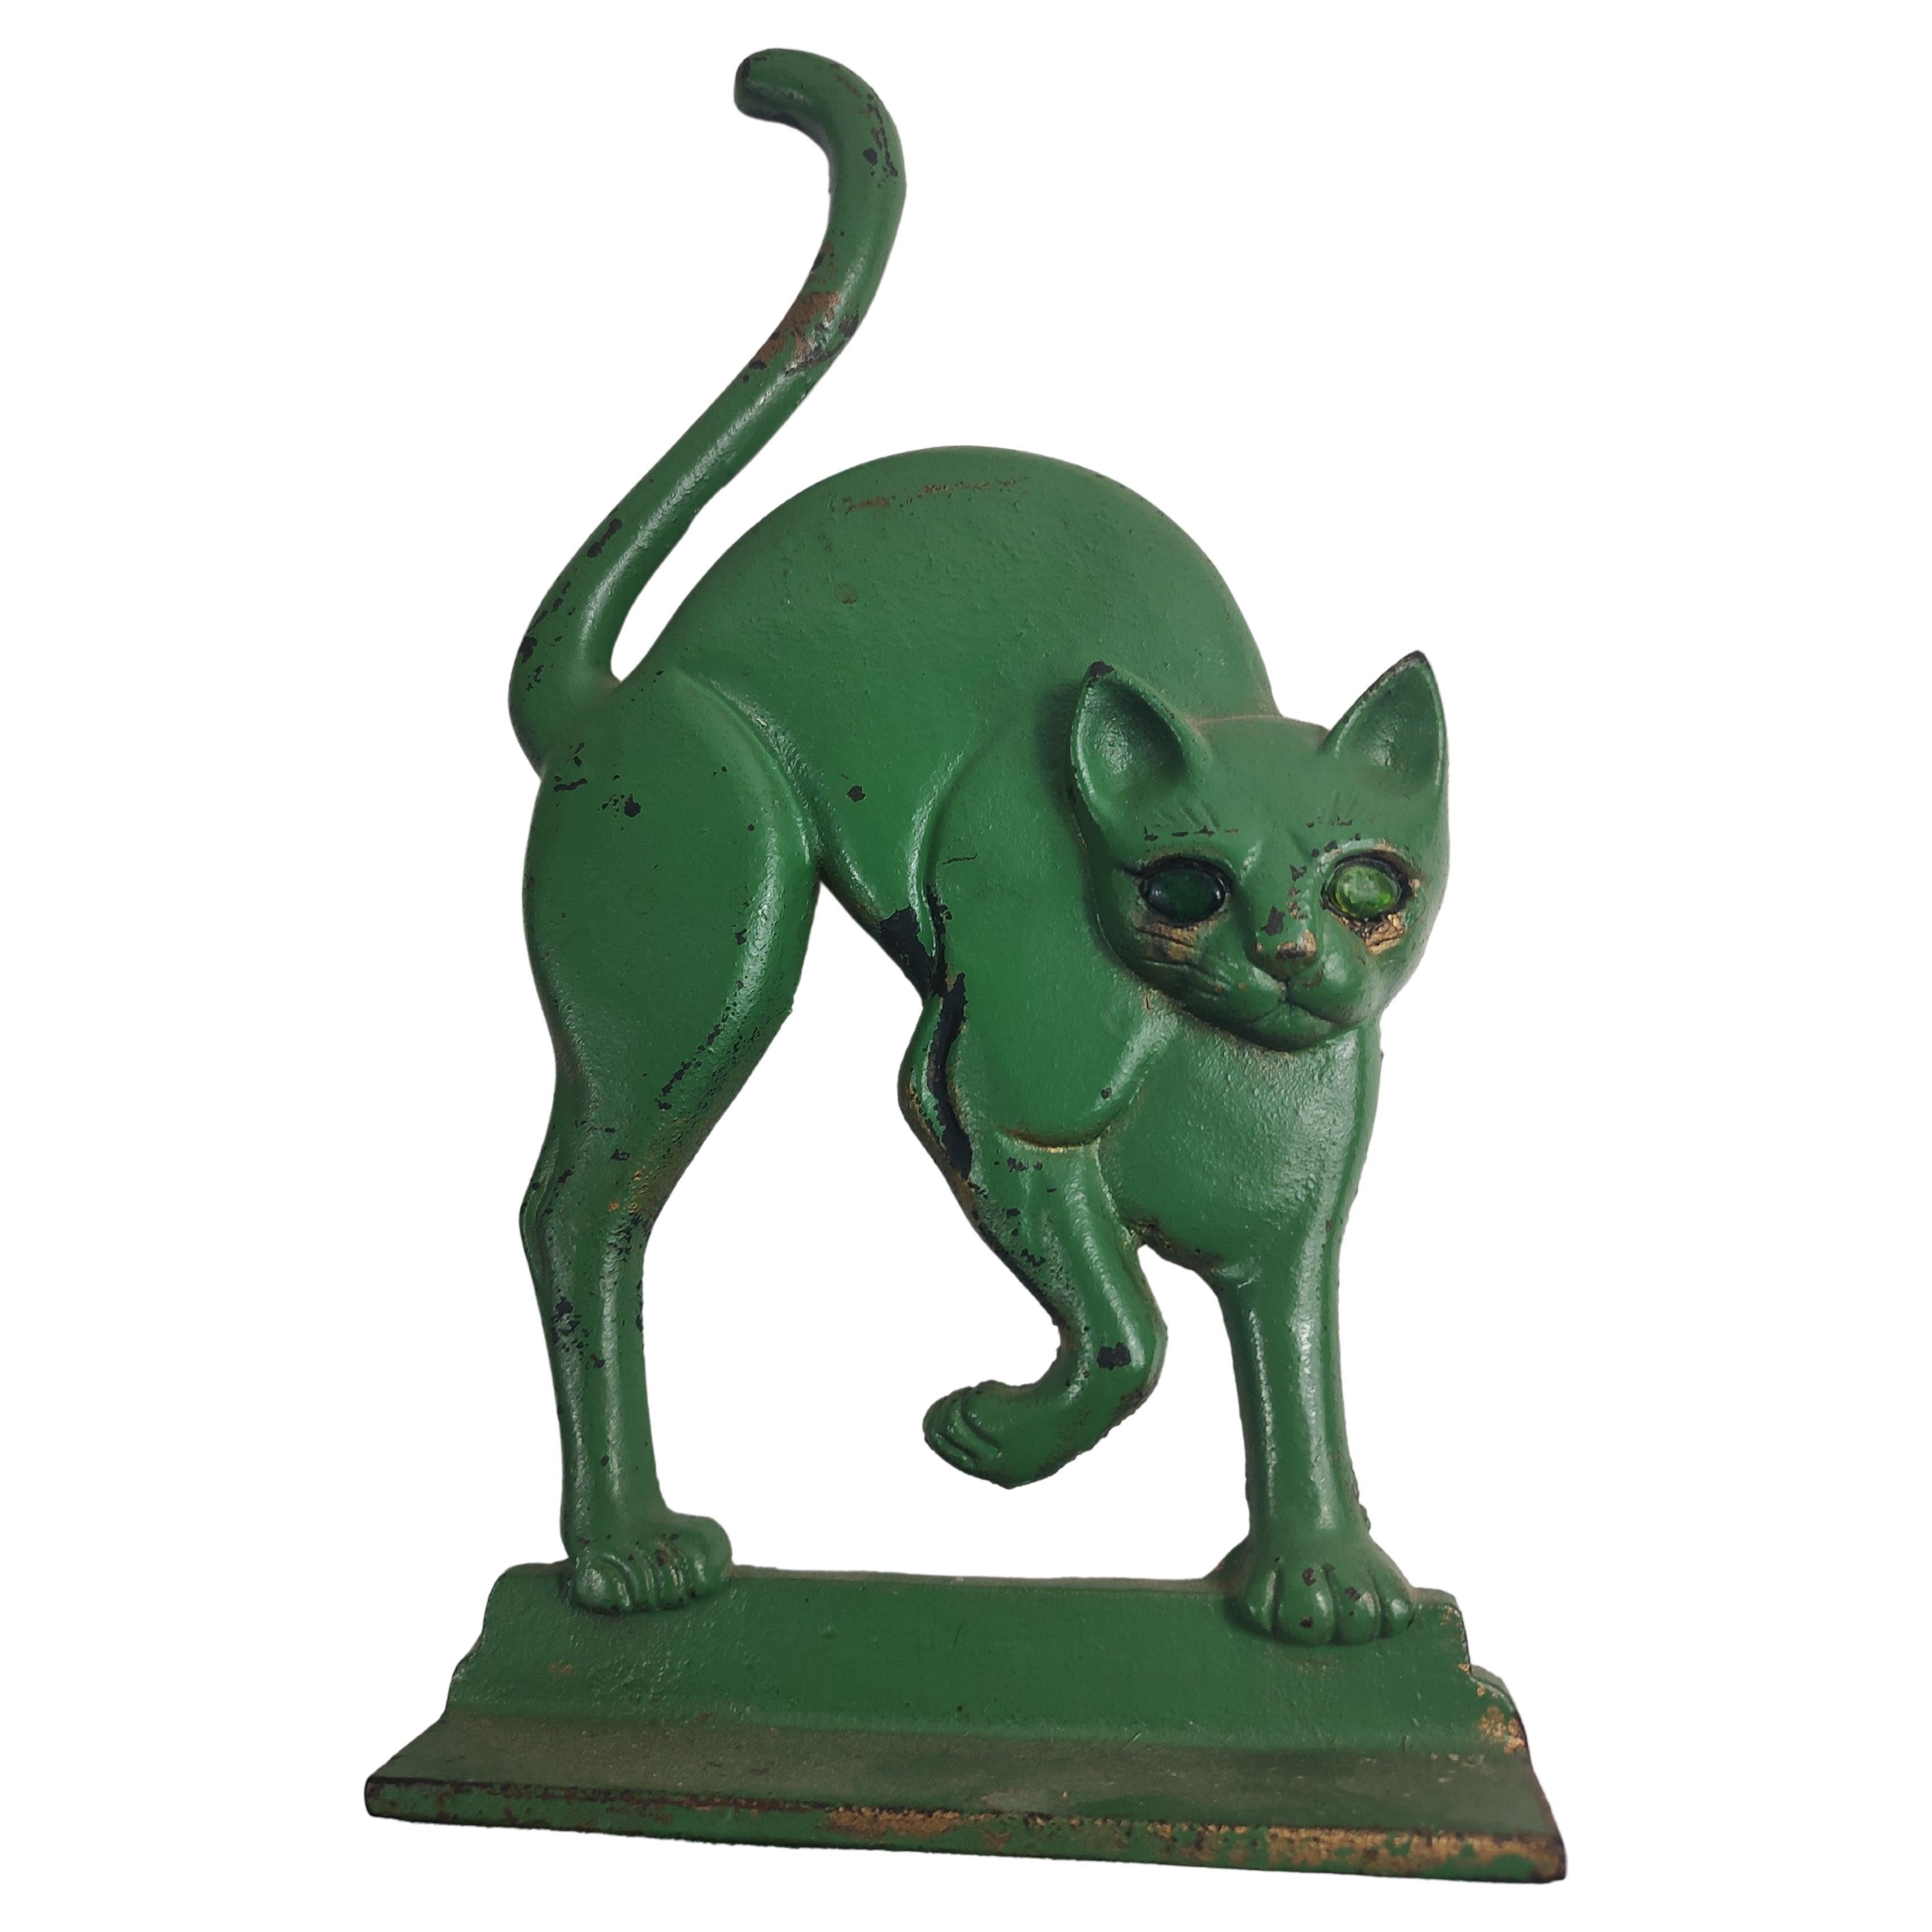 Fabulous style with arched back and tail with green glass eyes. Green is not original color. In excellent vintage condition with minimal wear.